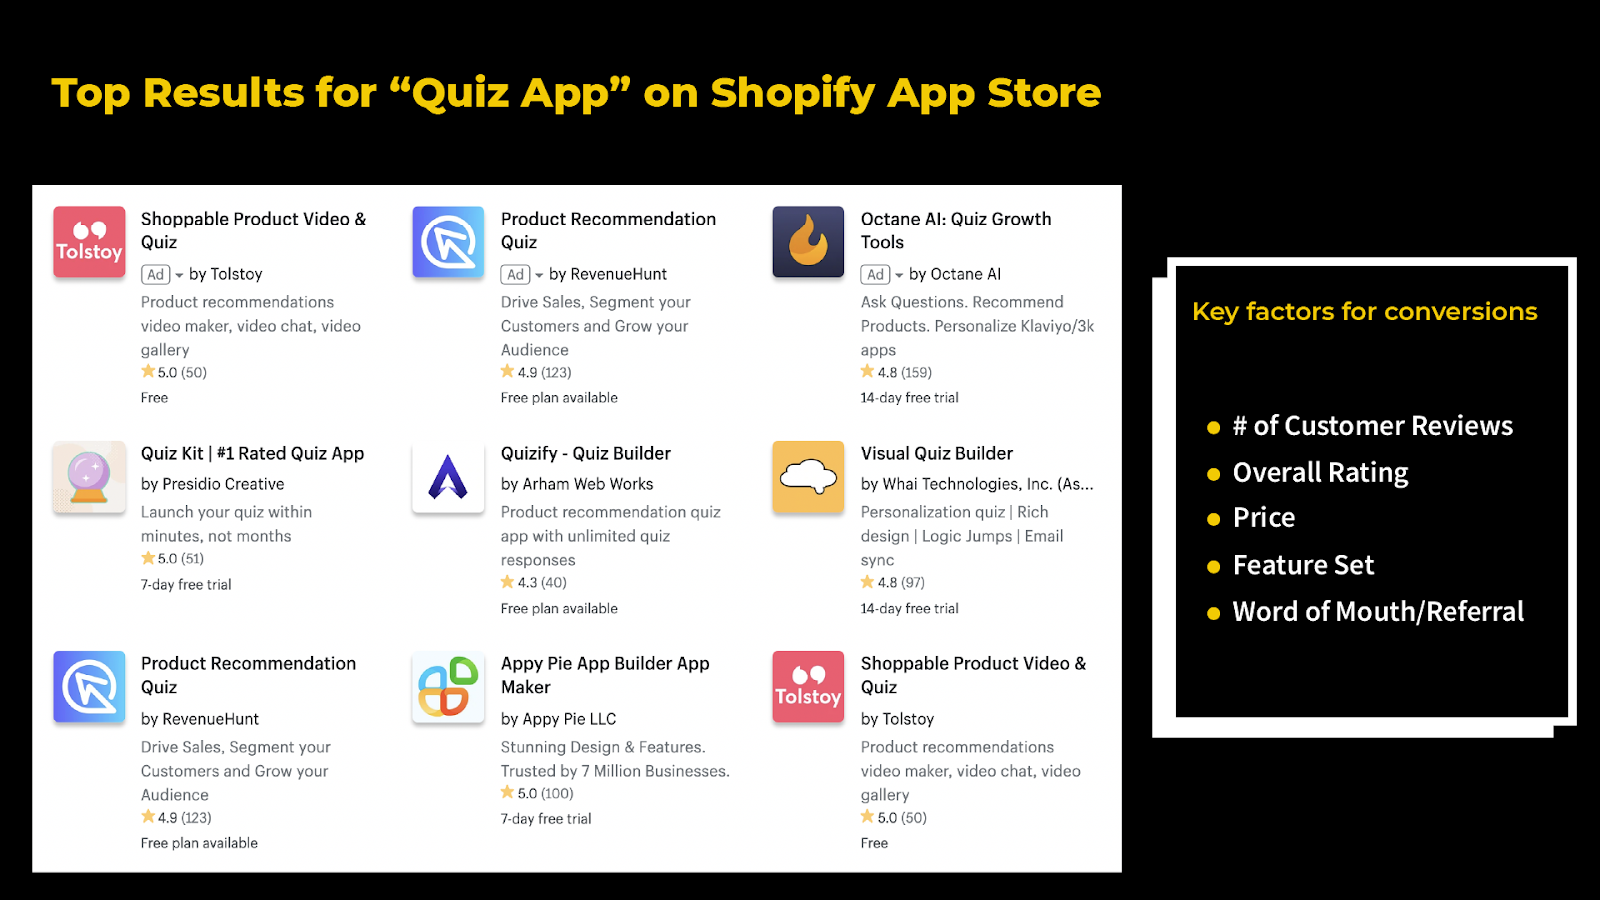 Top results for "Quiz App" on Shopify App Store